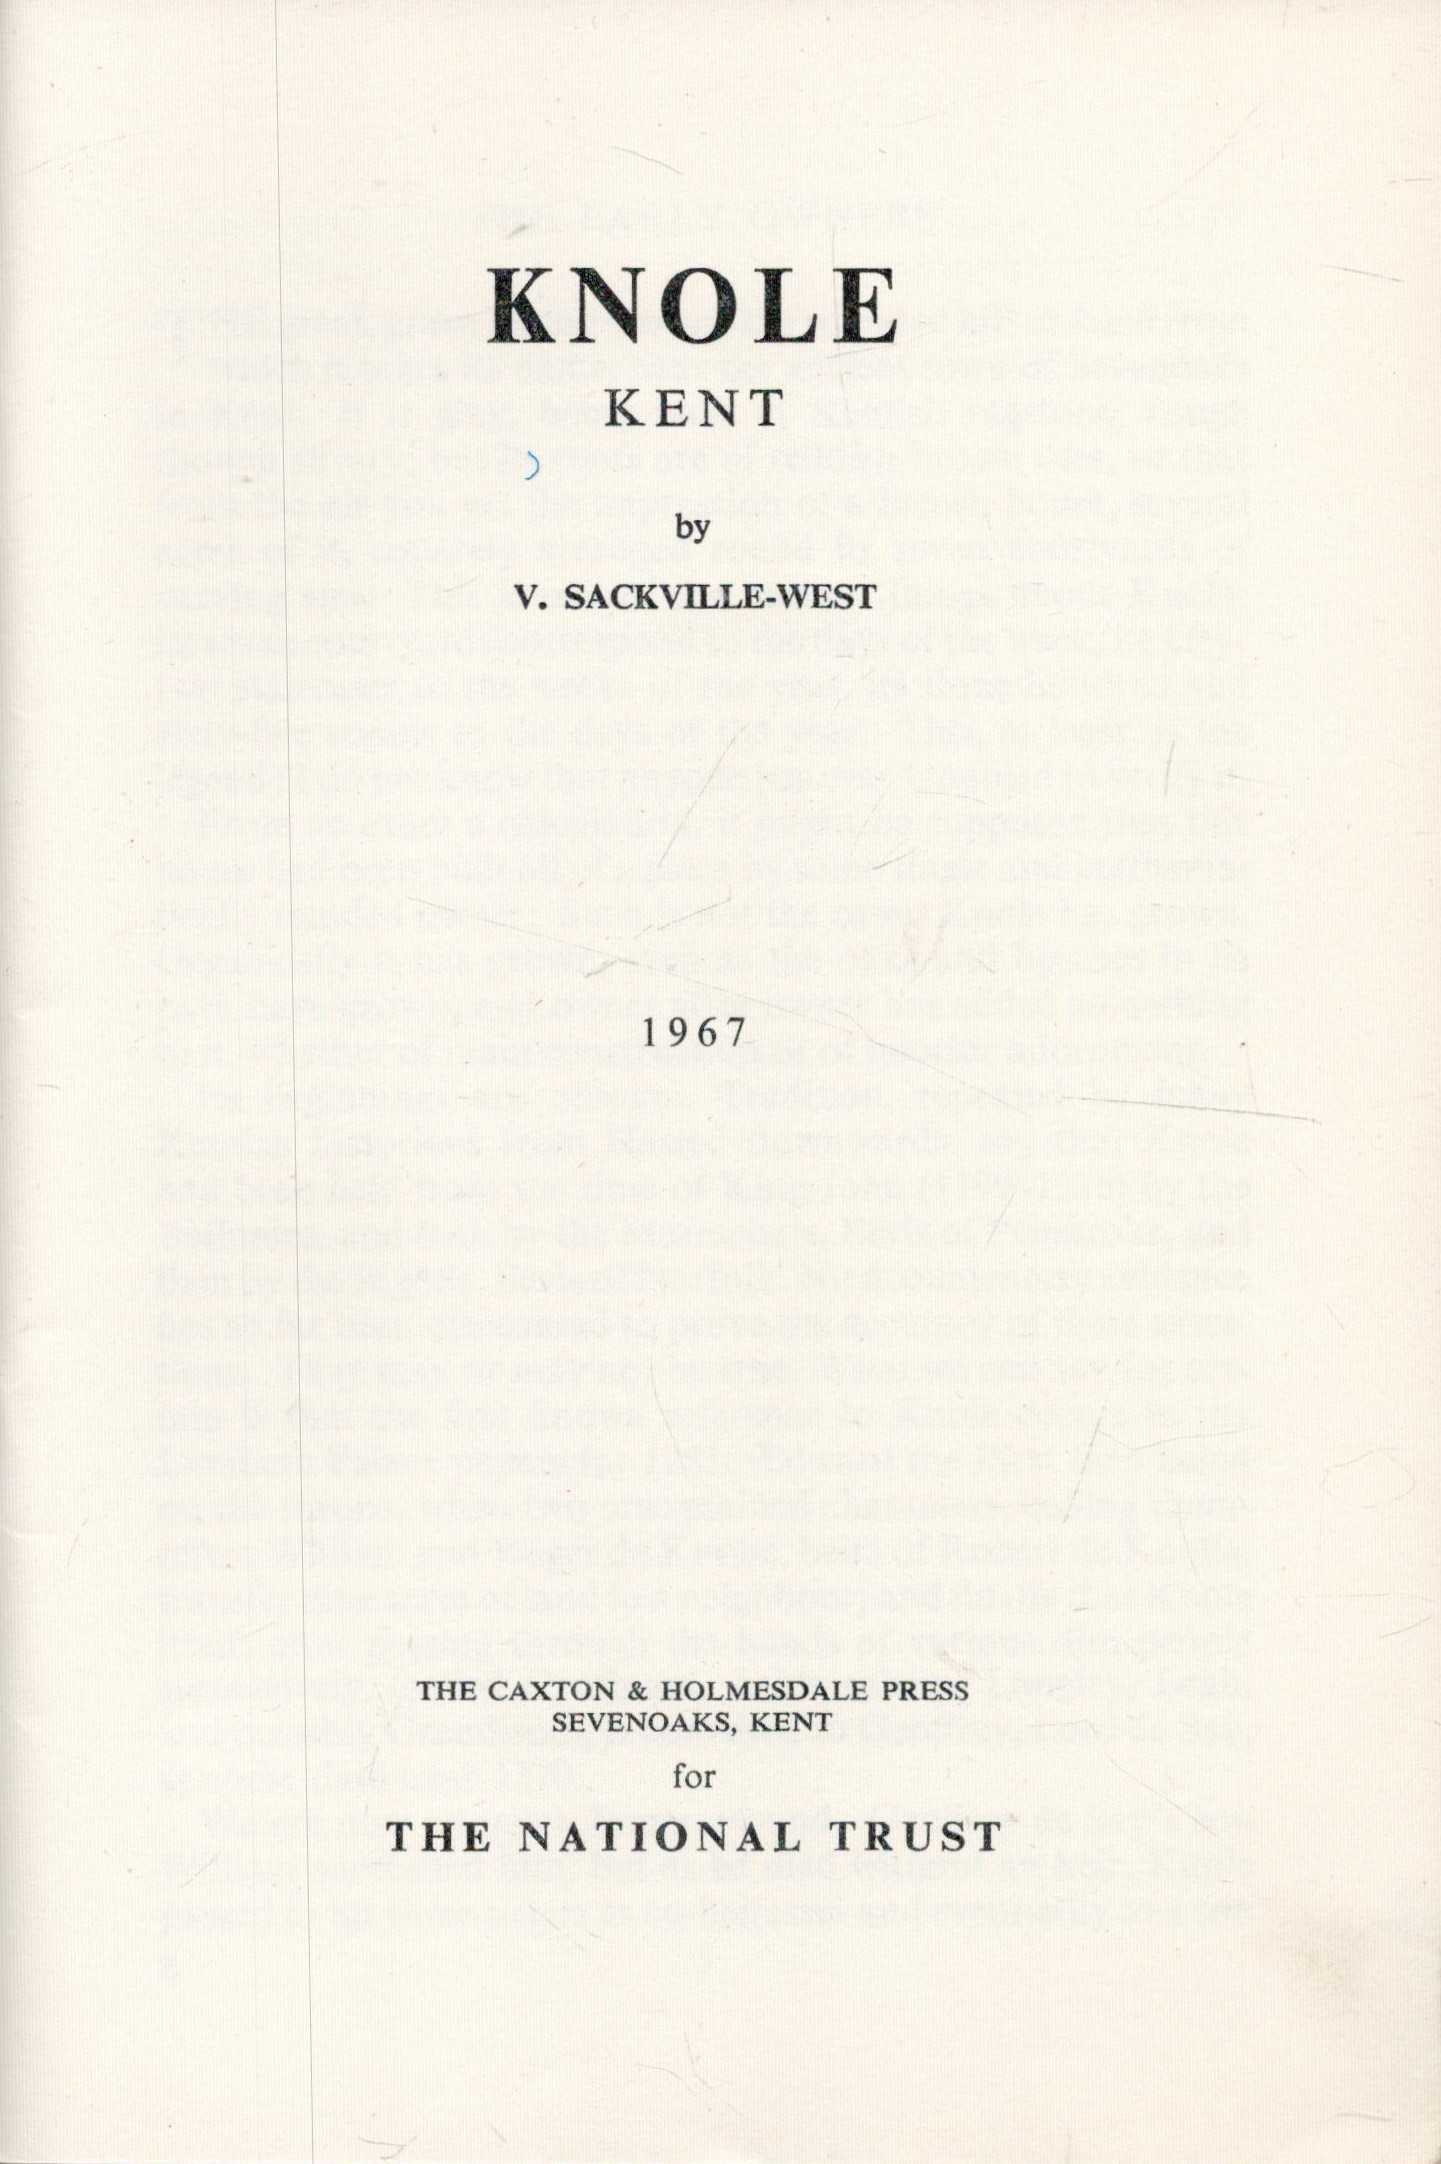 V. Sackville-West Knole, Kent. Published by the Caxton and Holmesdale Press. Kent for The National - Image 2 of 2